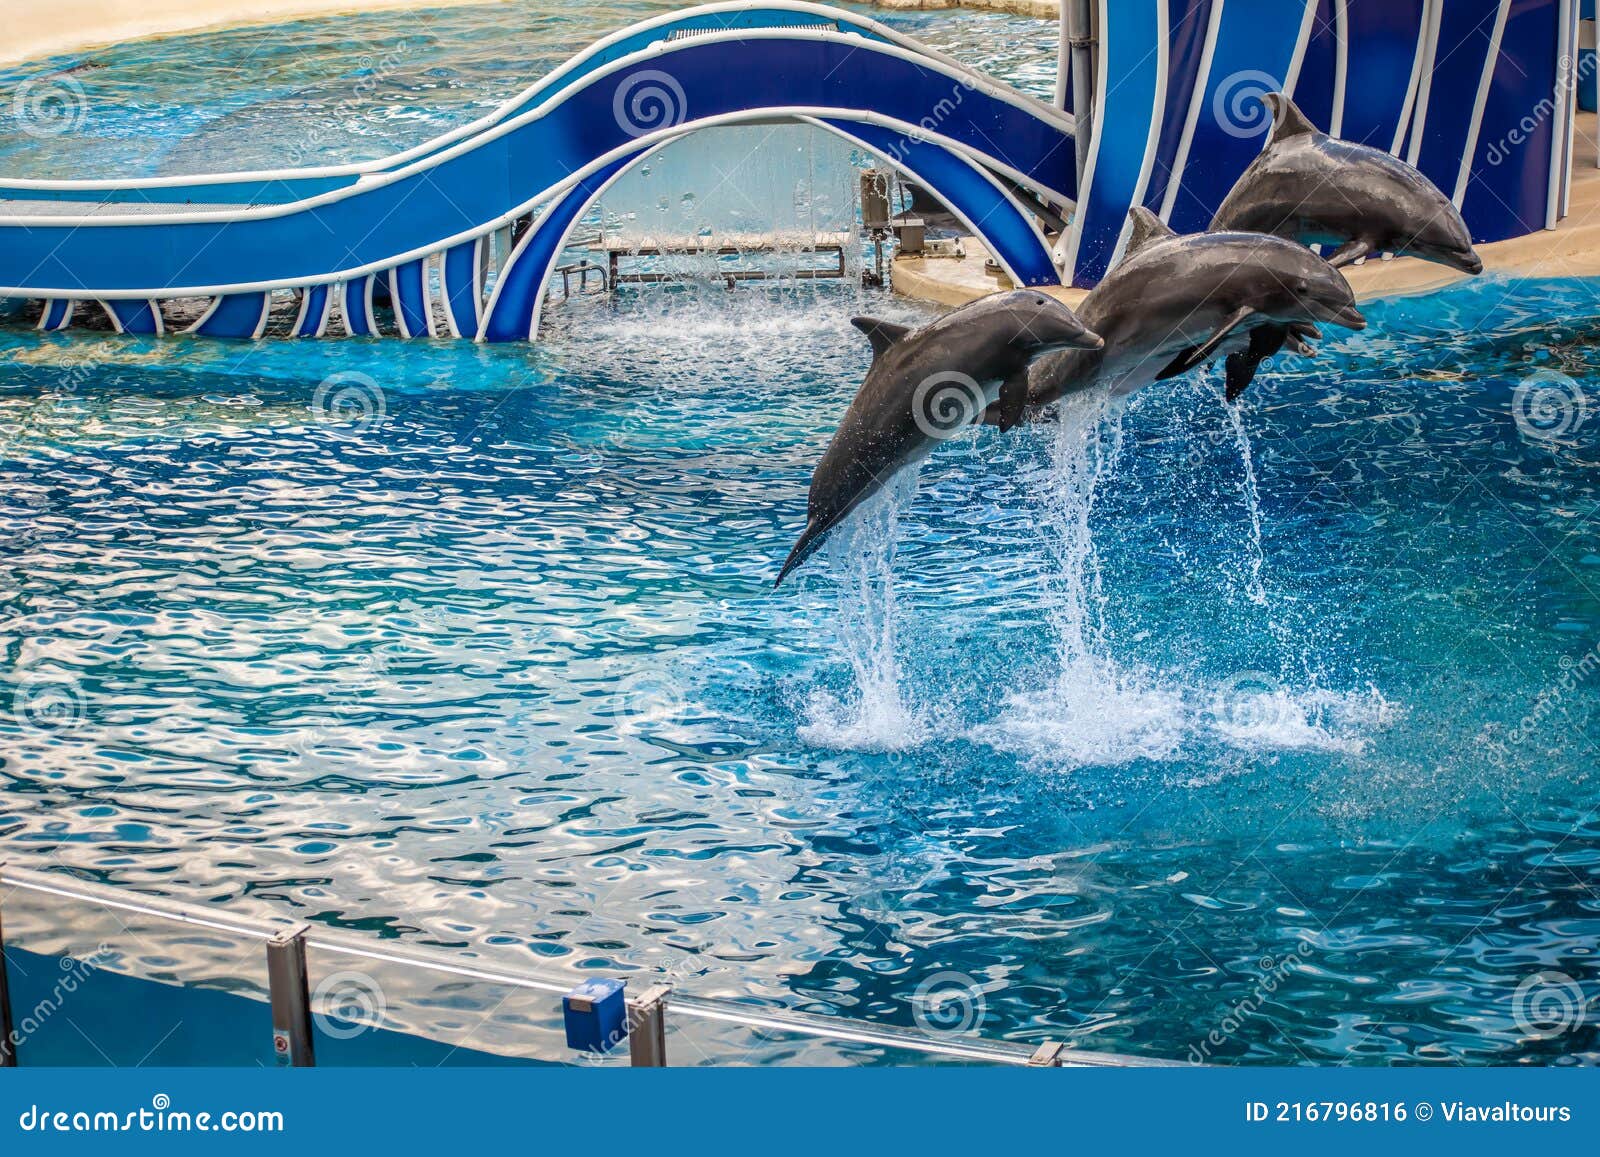 Dolphins Jumping in Dolphin Days Show at Seaworld 2 Editorial Photo ...